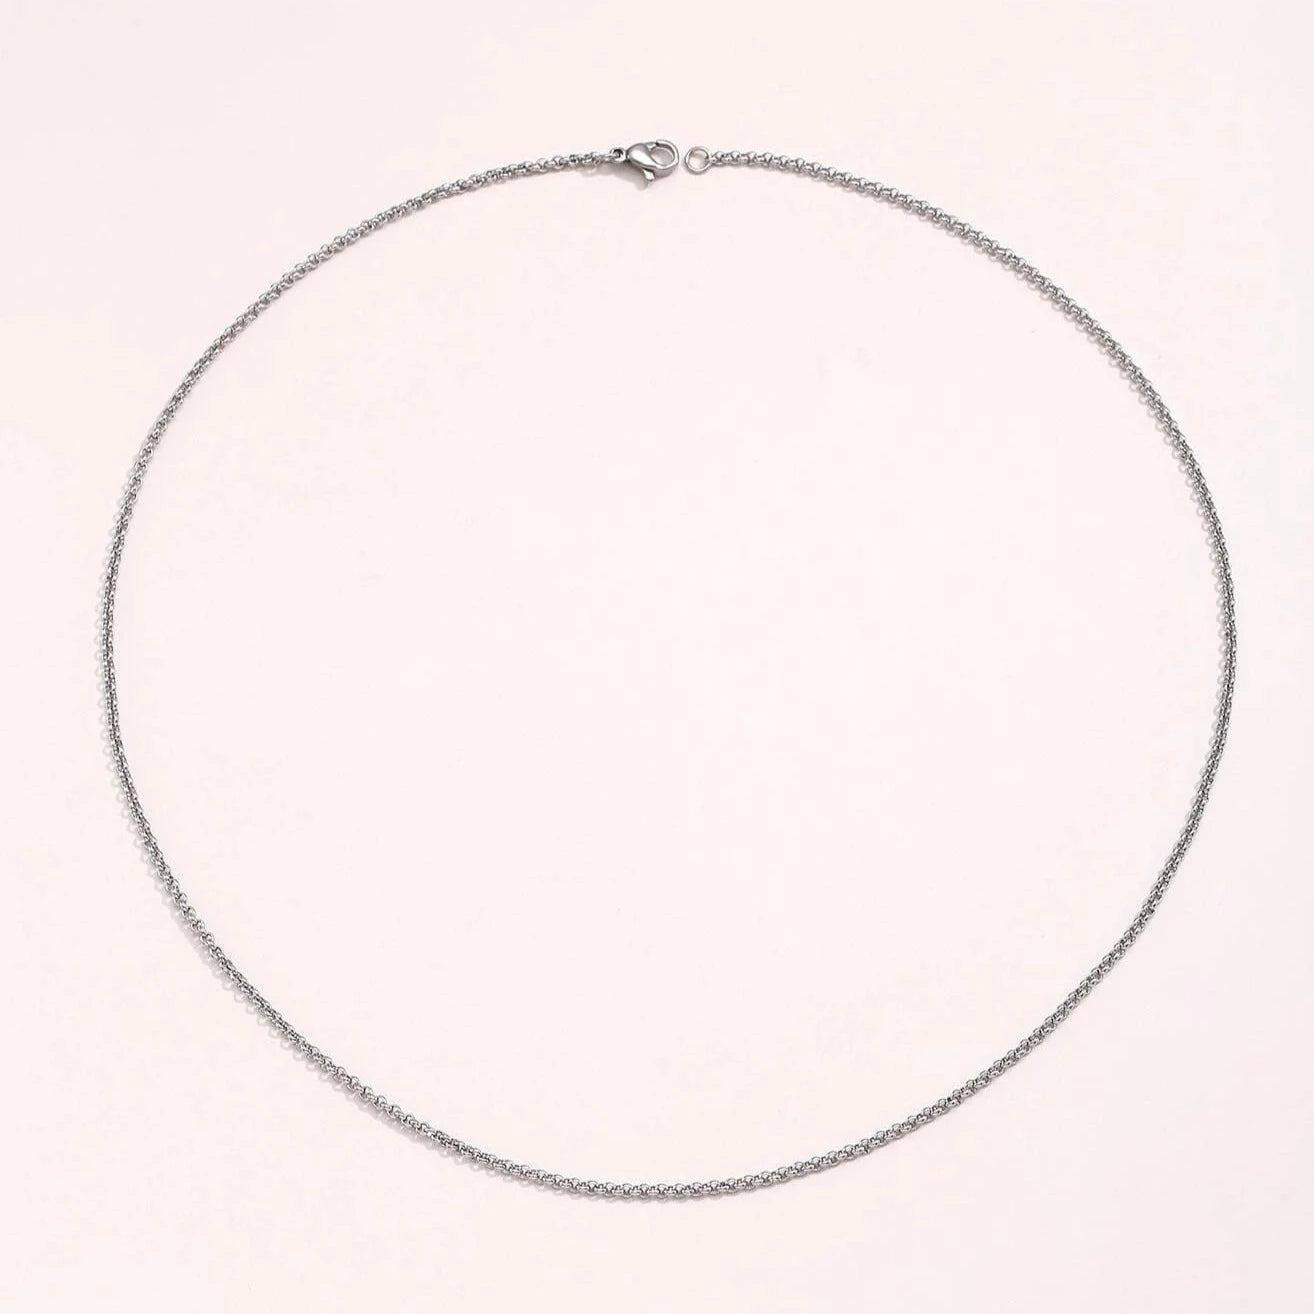 SILVER-TONE STAINLESS STEEL CURB CHAIN NECKLACE